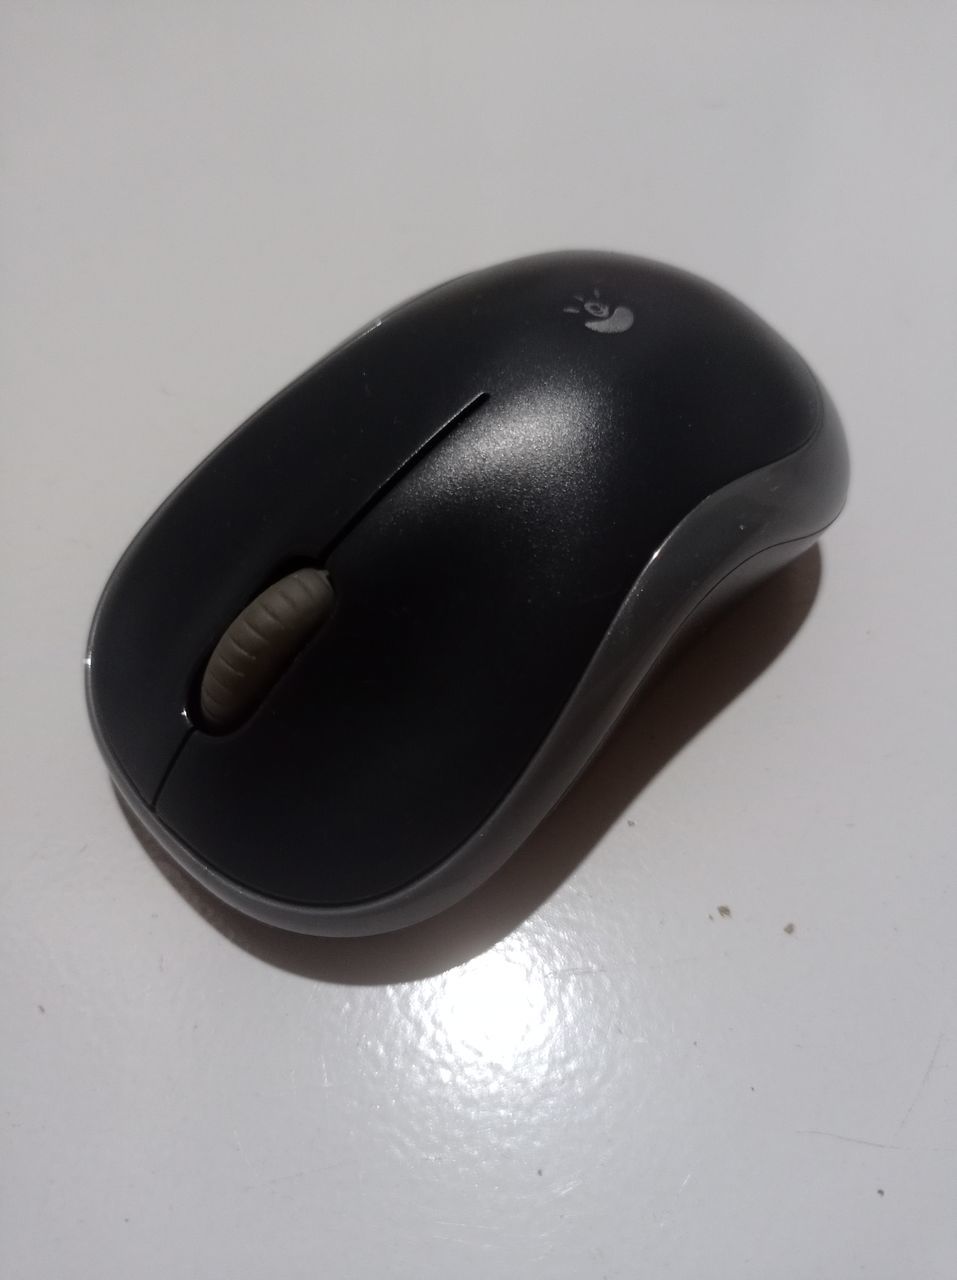 computer mouse, electronic device, computer component, indoors, technology, no people, black, studio shot, single object, close-up, gray